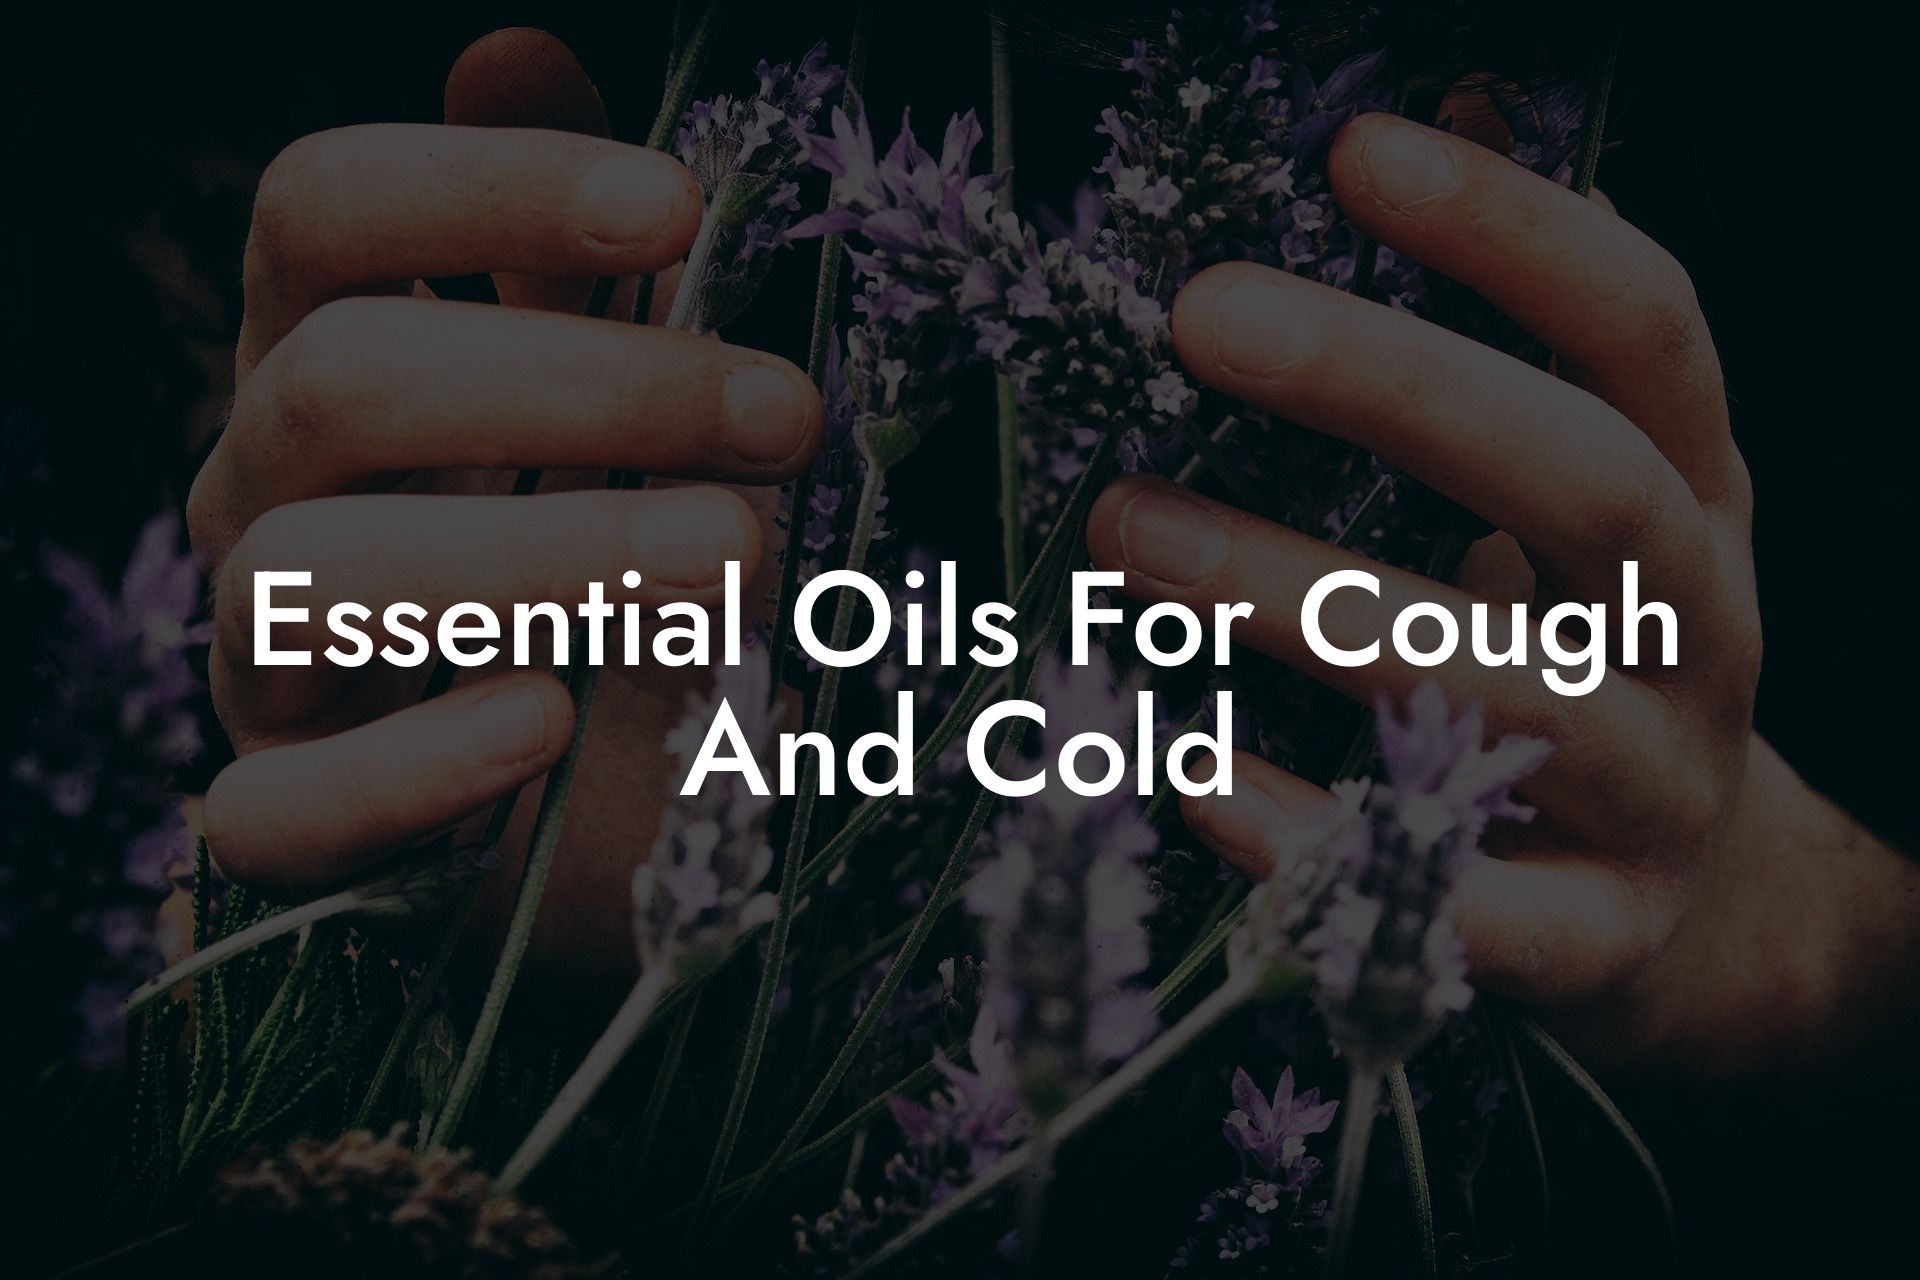 Essential Oils For Cough And Cold